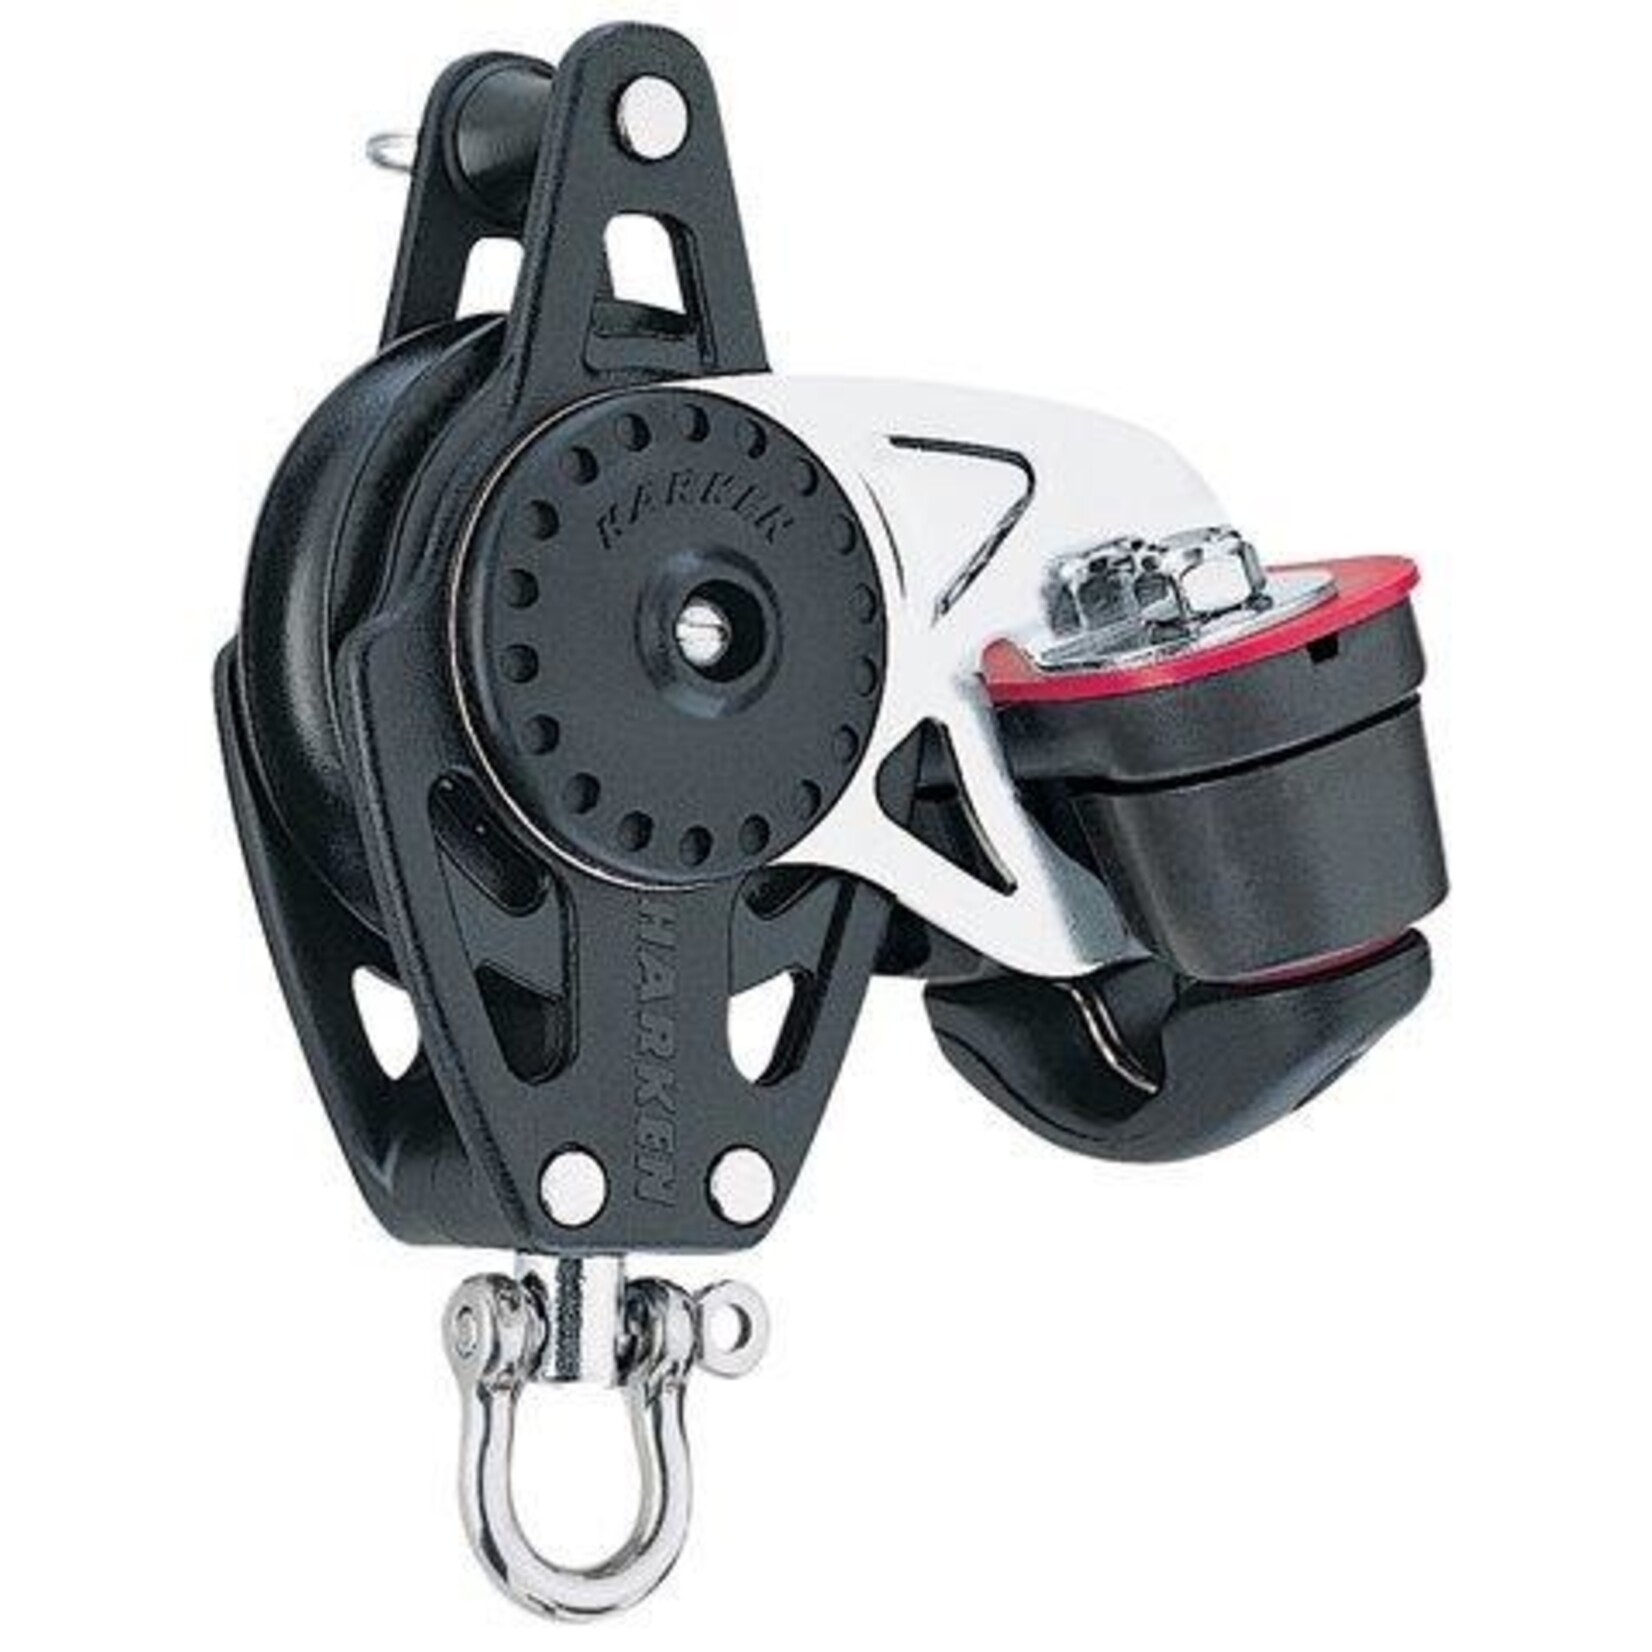 Harken 40mm Carbo Block w/Cam Cleat and Becket